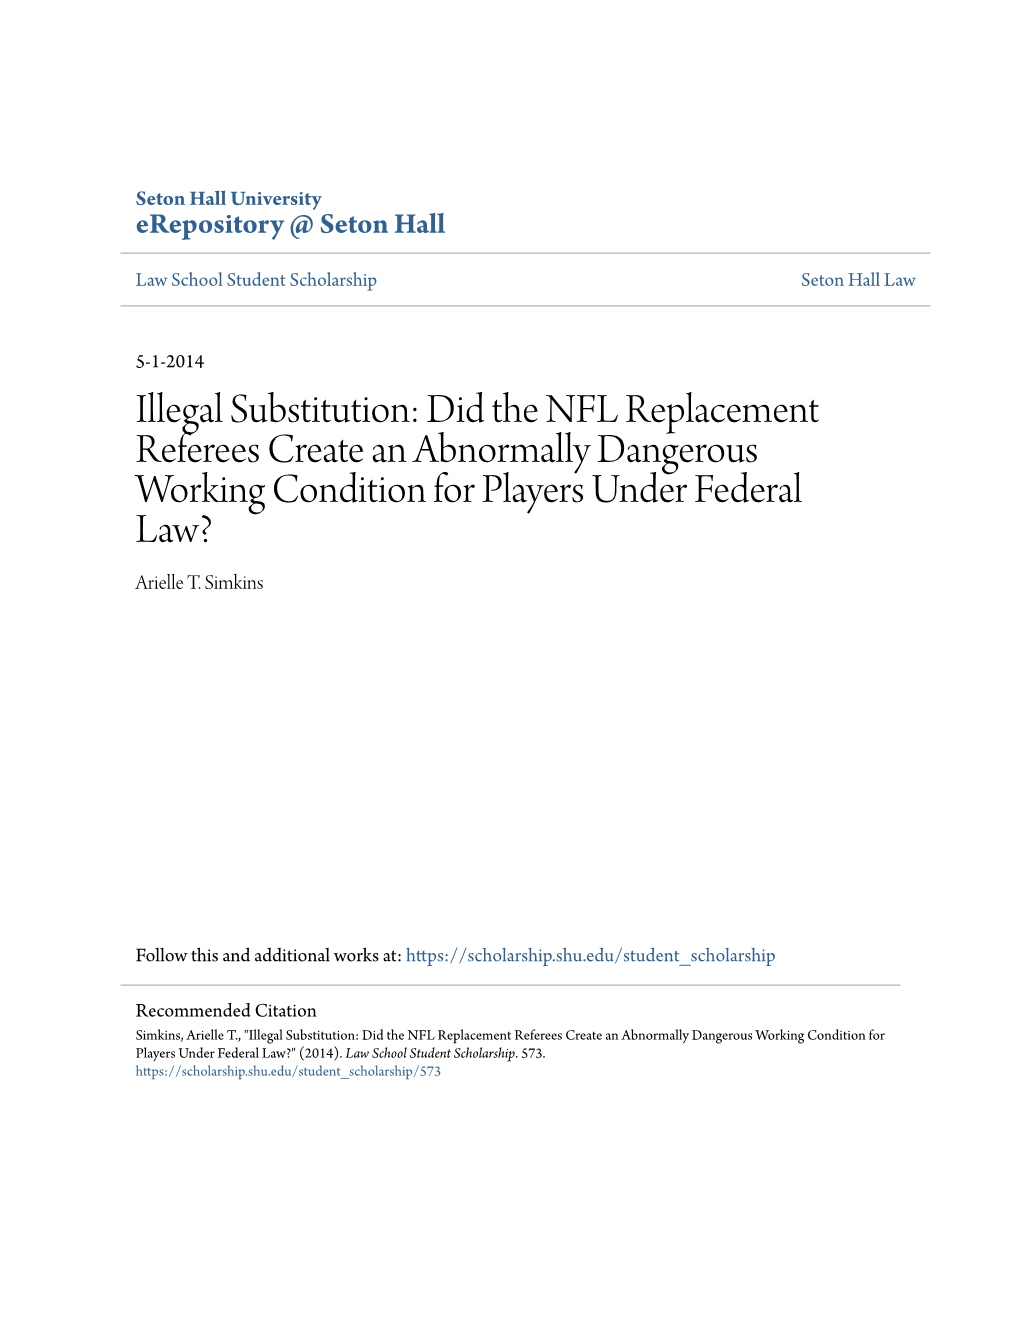 Illegal Substitution: Did the NFL Replacement Referees Create an Abnormally Dangerous Working Condition for Players Under Federal Law? Arielle T